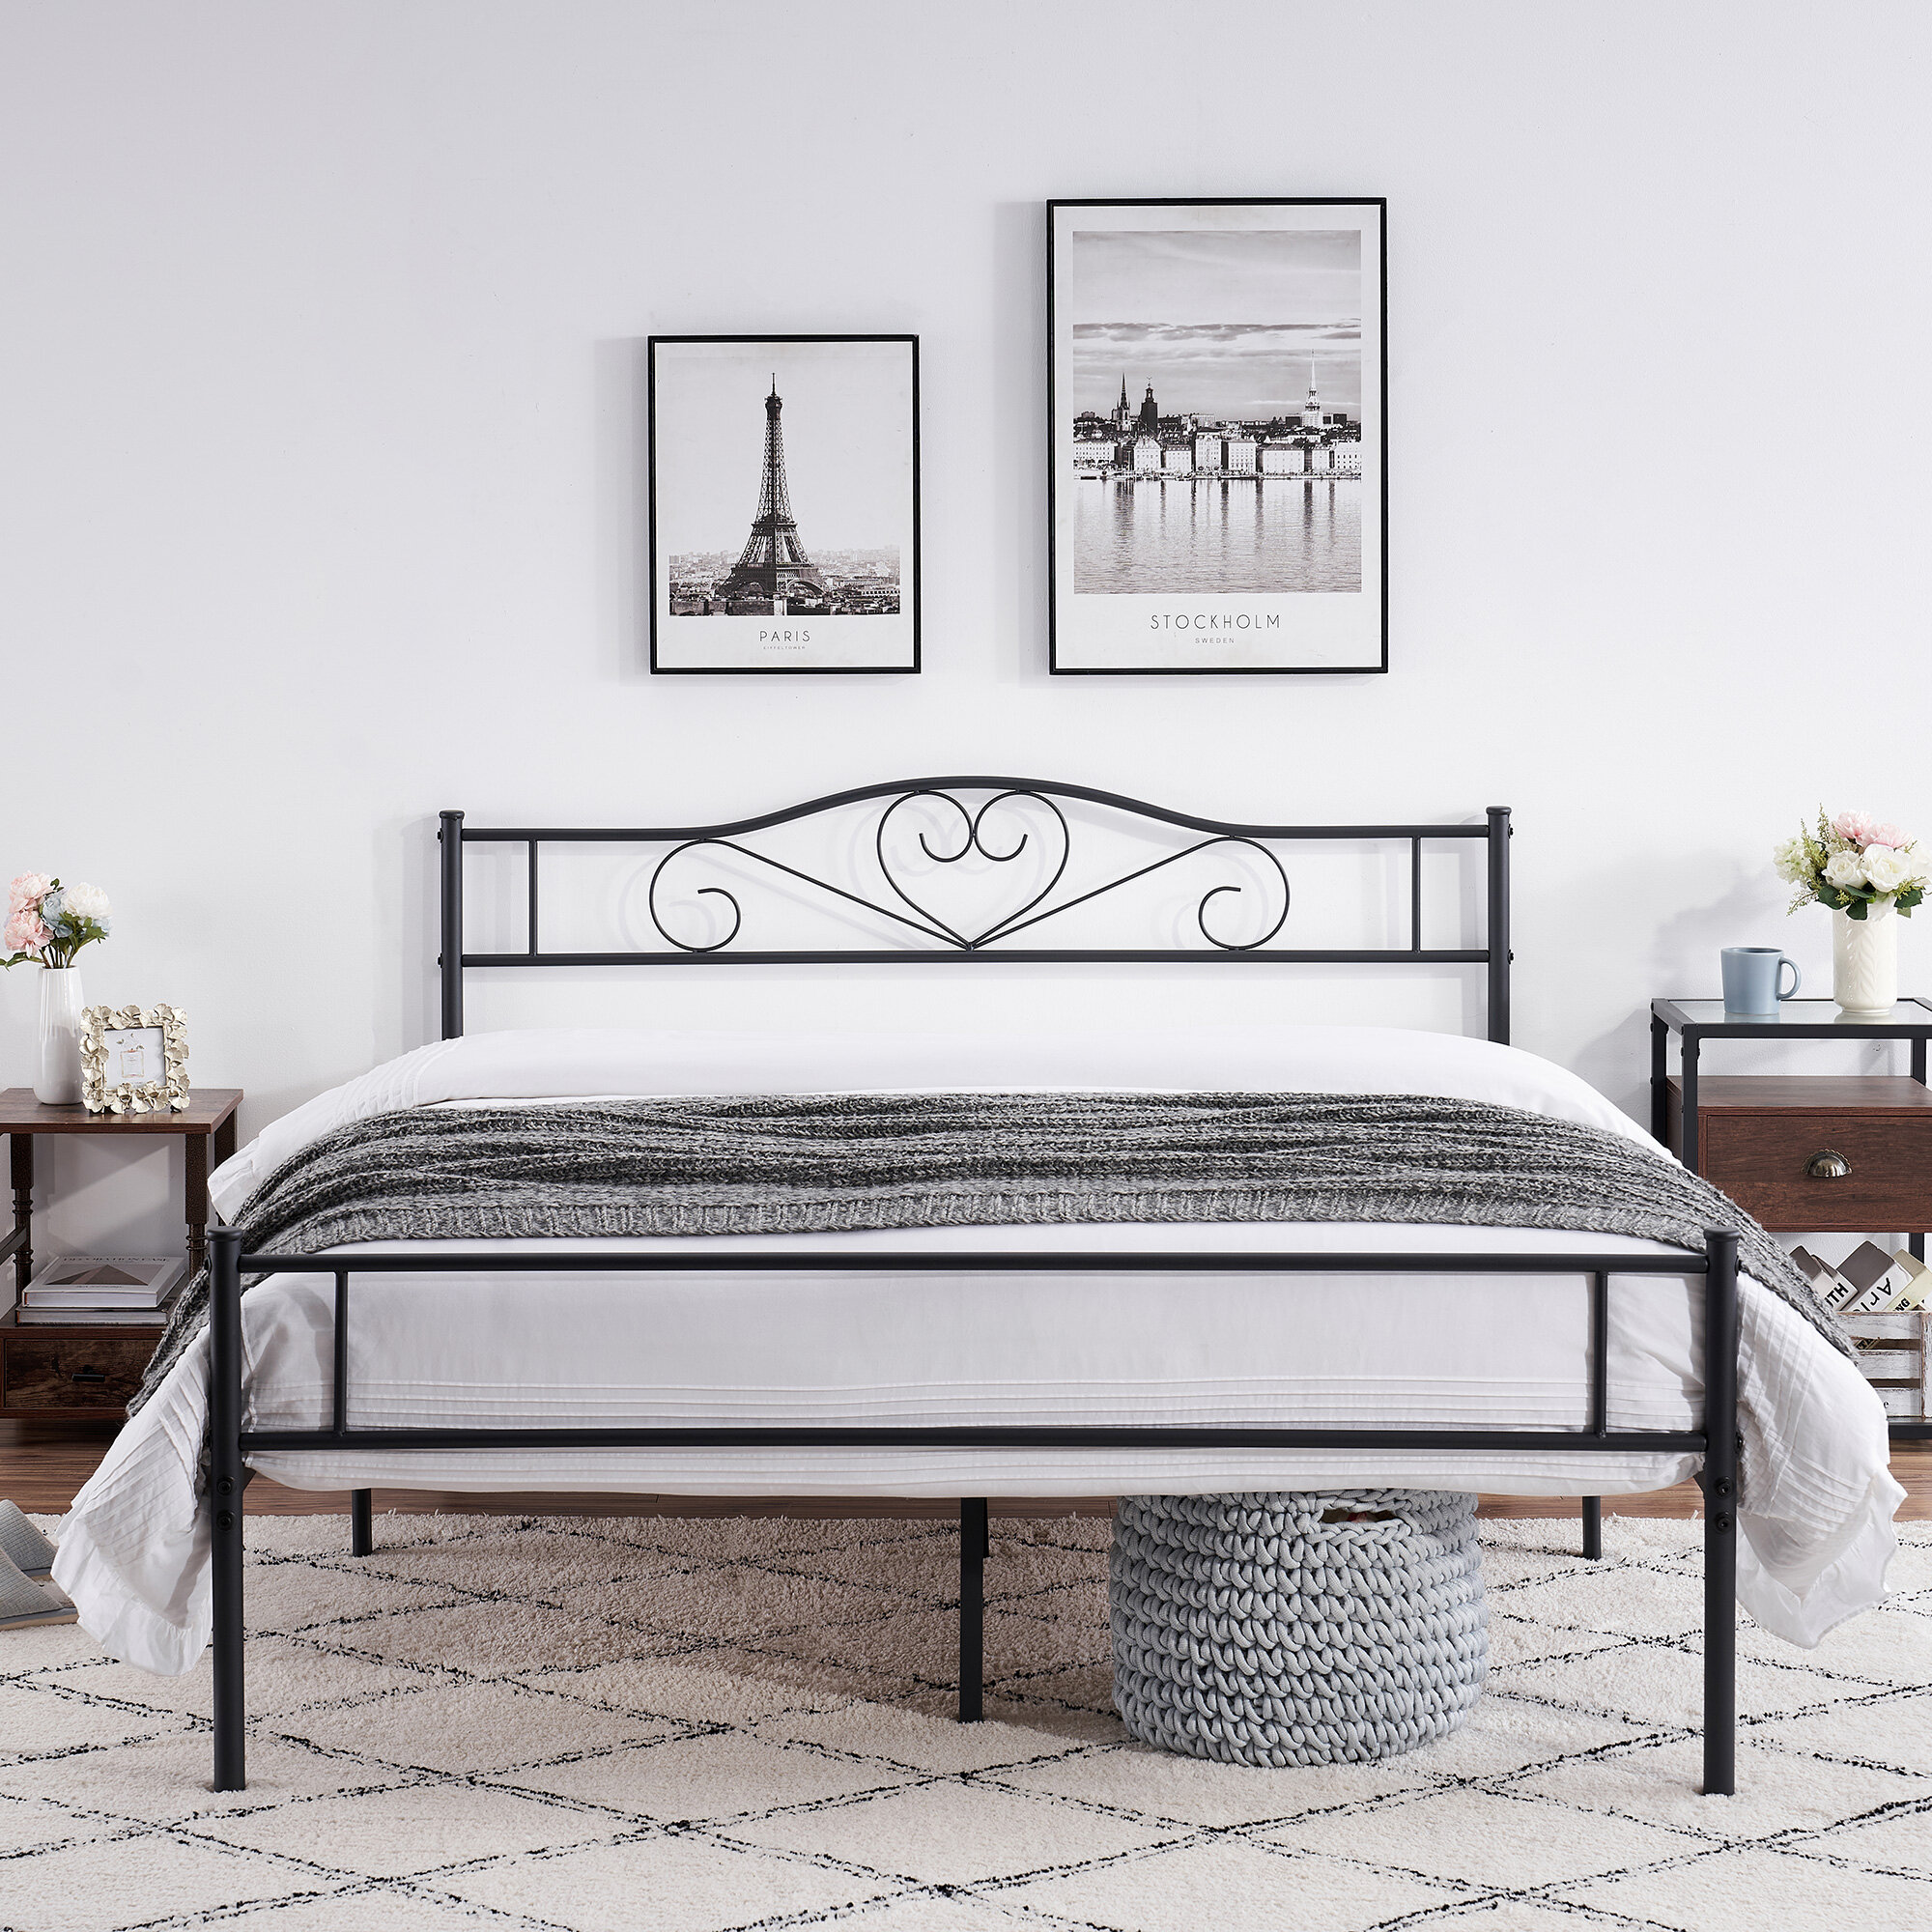 DUMEE Metal Bed Twin Size with Headboard and Footboard Mattress Foundation Steel Slat Support Assemble Easily Mattress on Top Basics Queen Bed Frame Back Bed Frame for Kids